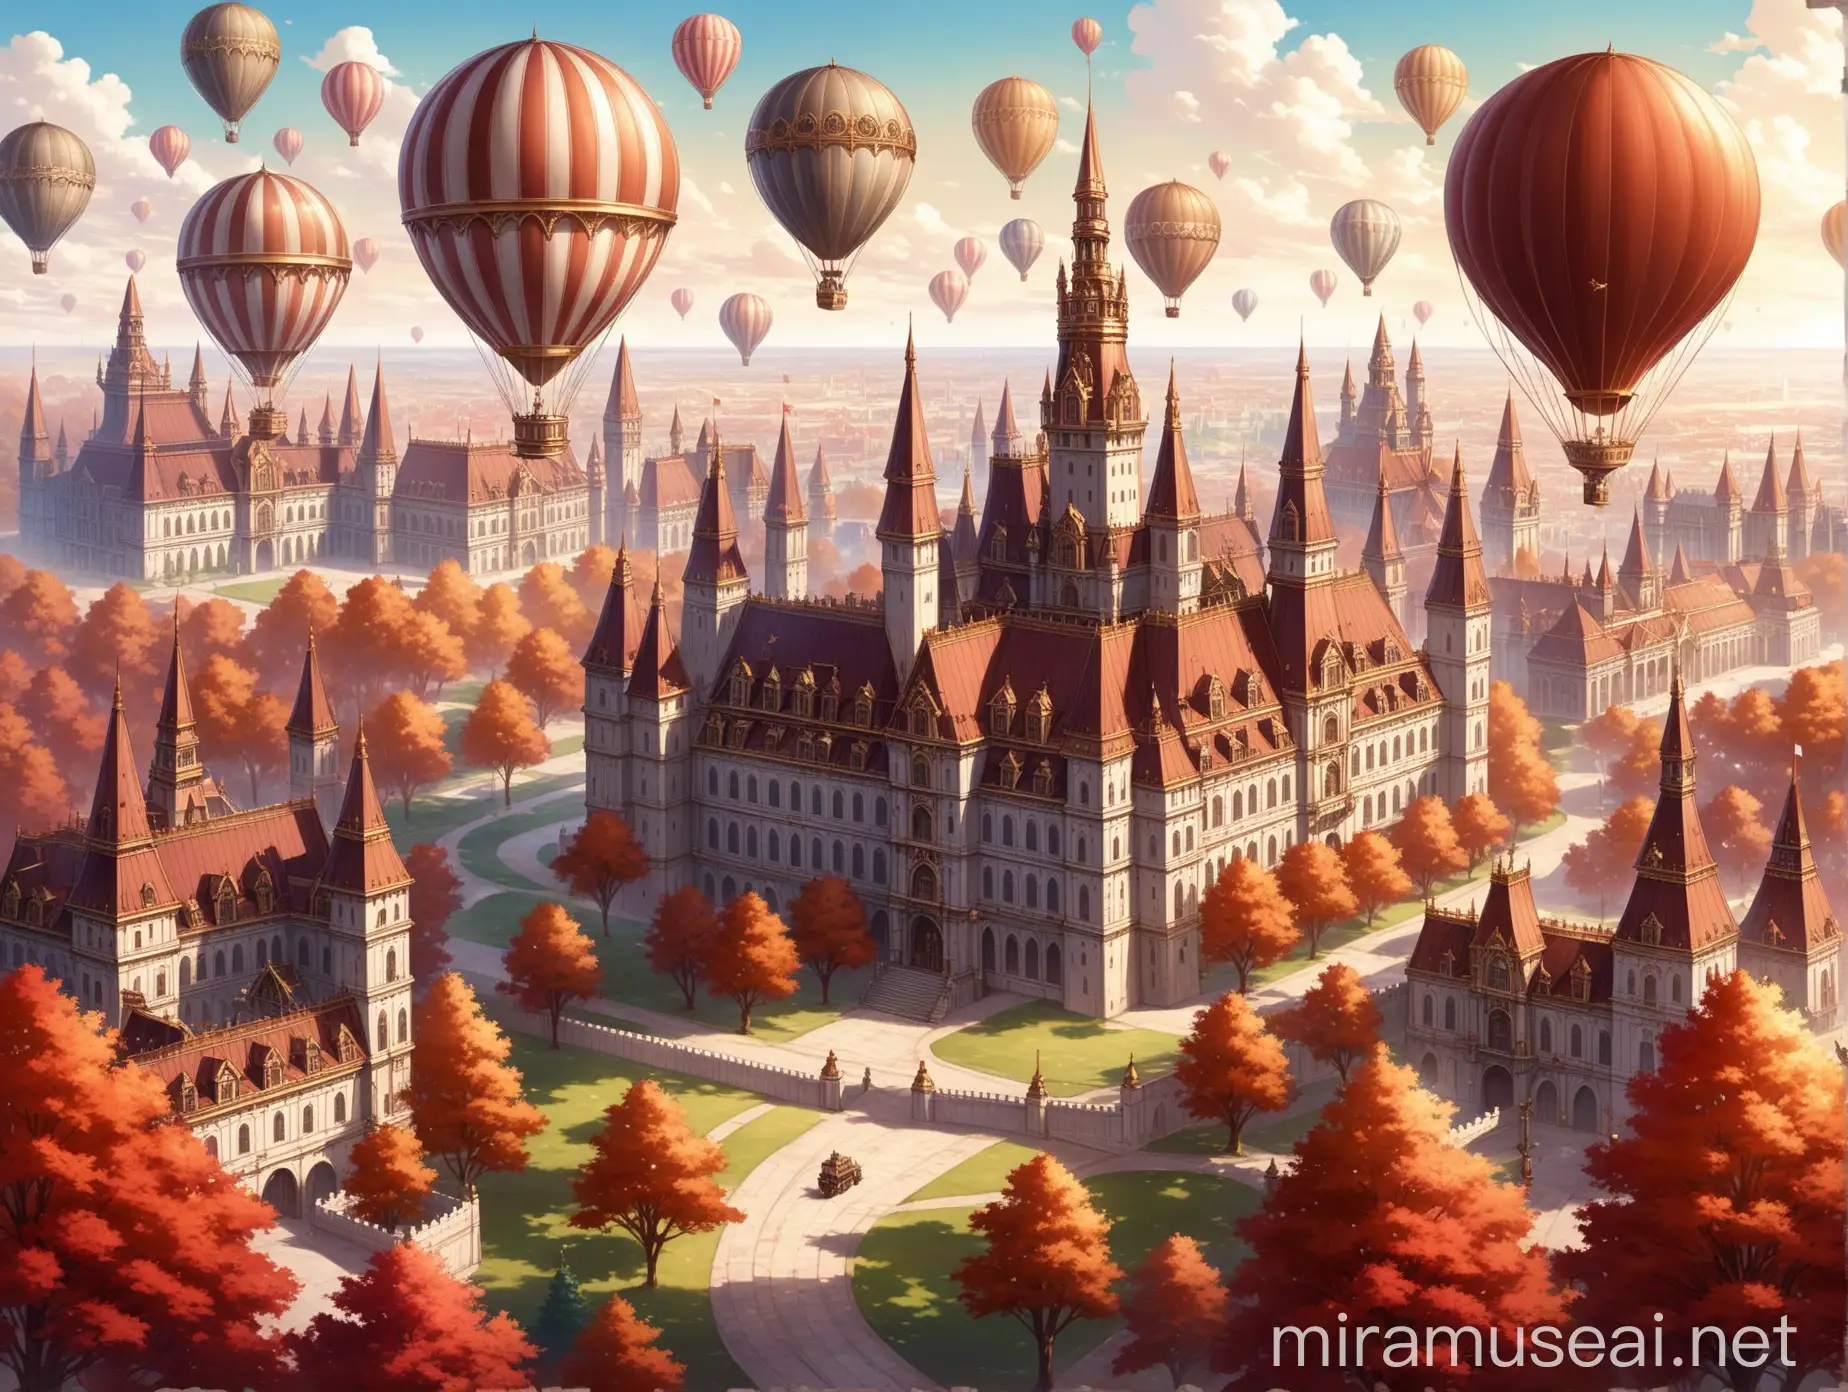 Enchanting Victorian Fantasy Cityscape with Royal Palace and Steampunk Architecture